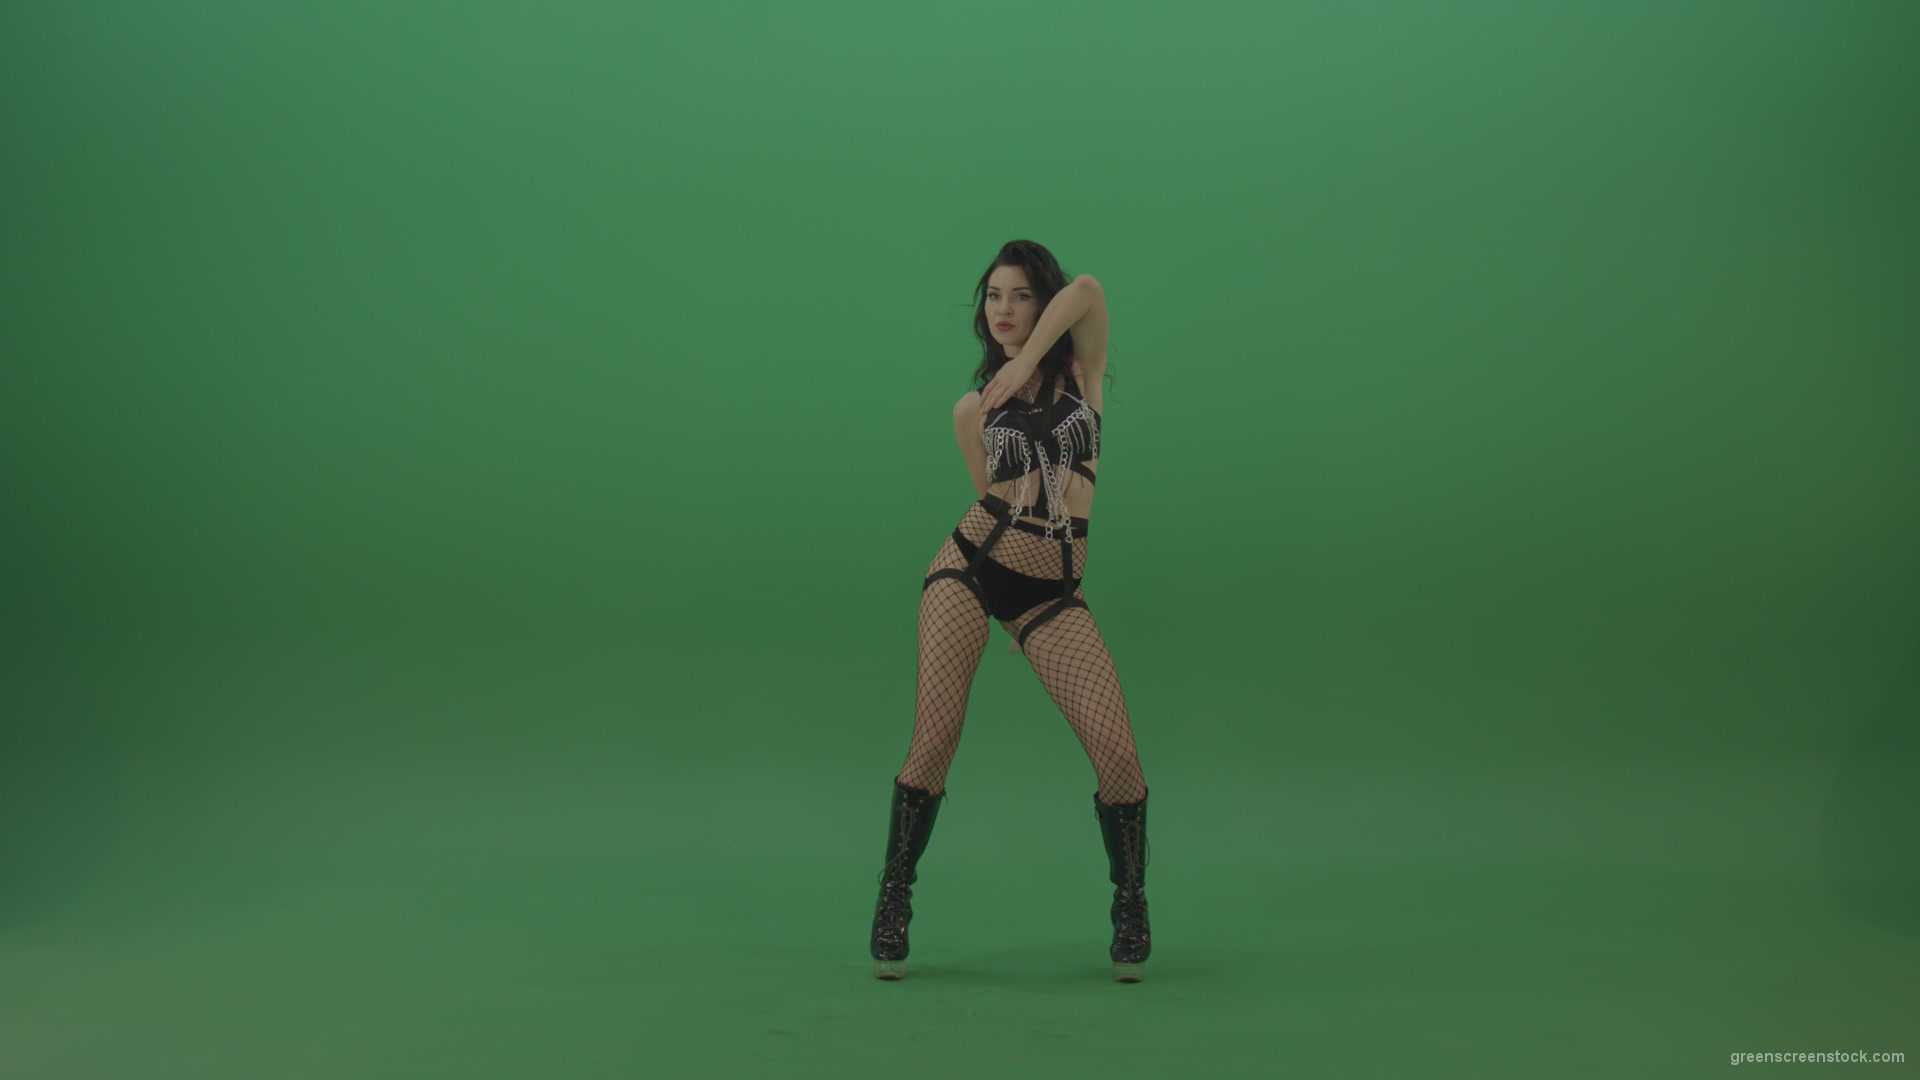 Beautiful-erotic-dressed-girl-seductively-dancing-on-green-background_009 Green Screen Stock